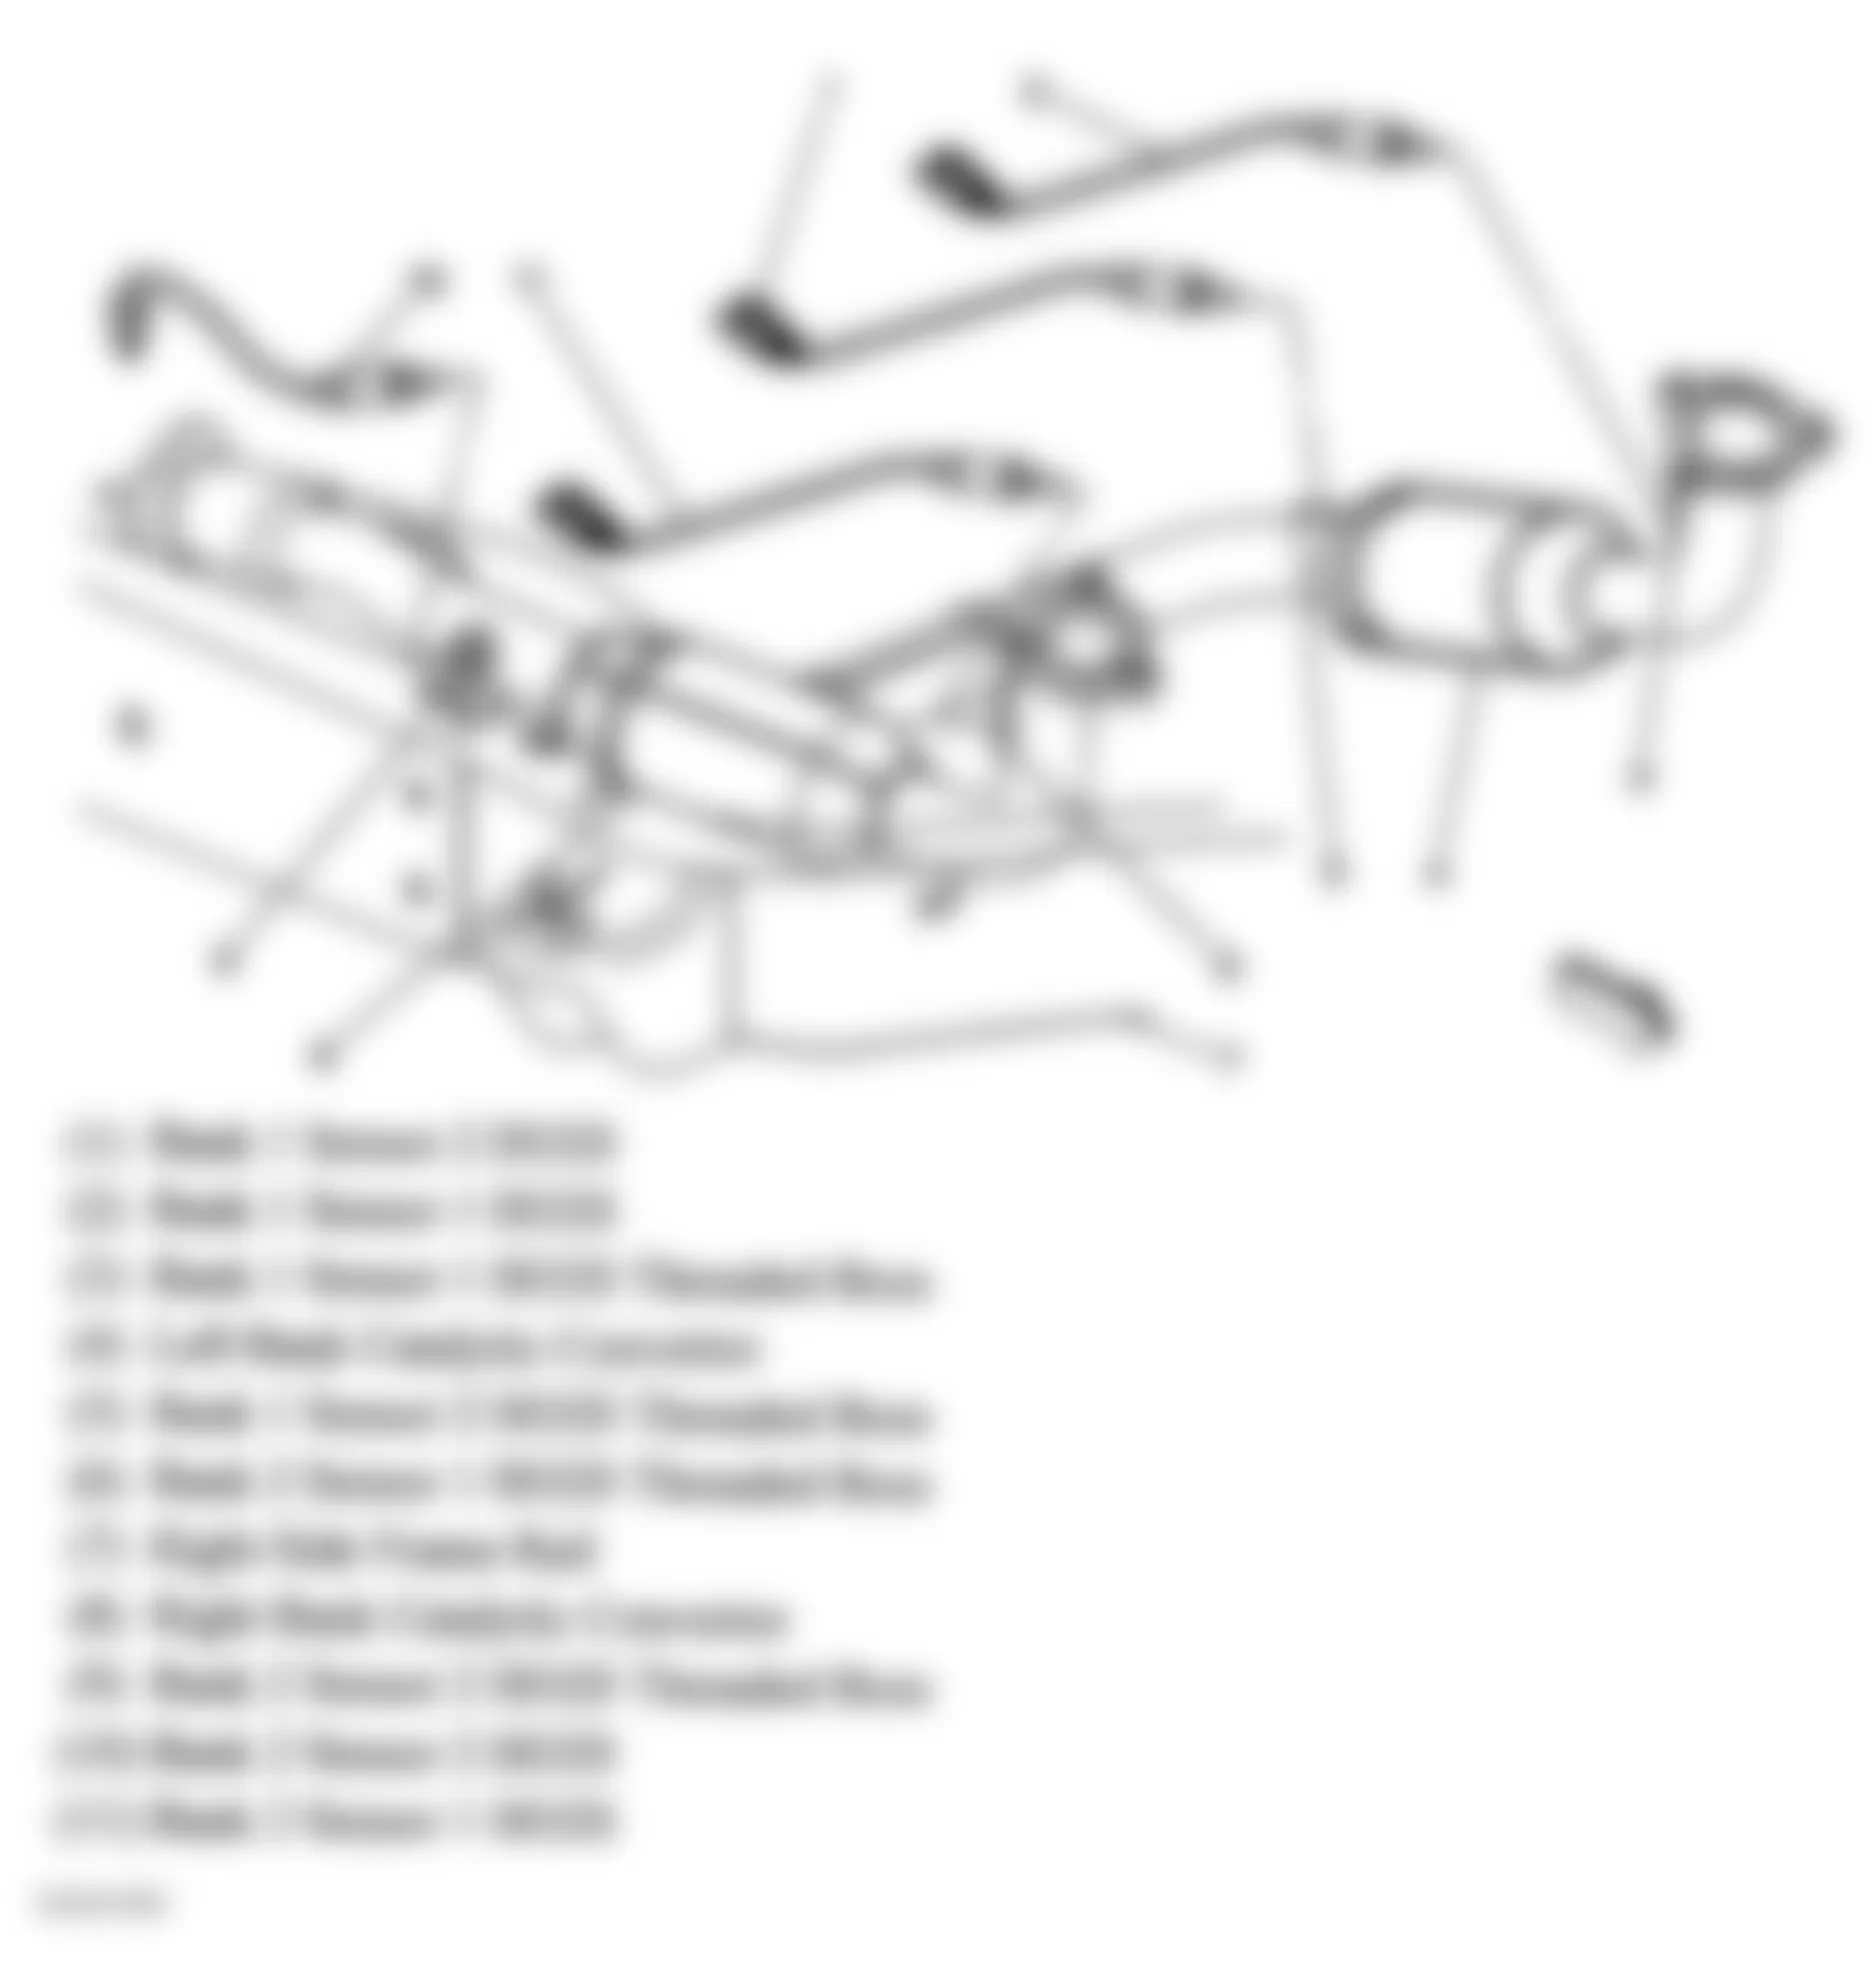 Chevrolet Avalanche 1500 2005 - Component Locations -  Exhaust System (4.8L & 5.3L)